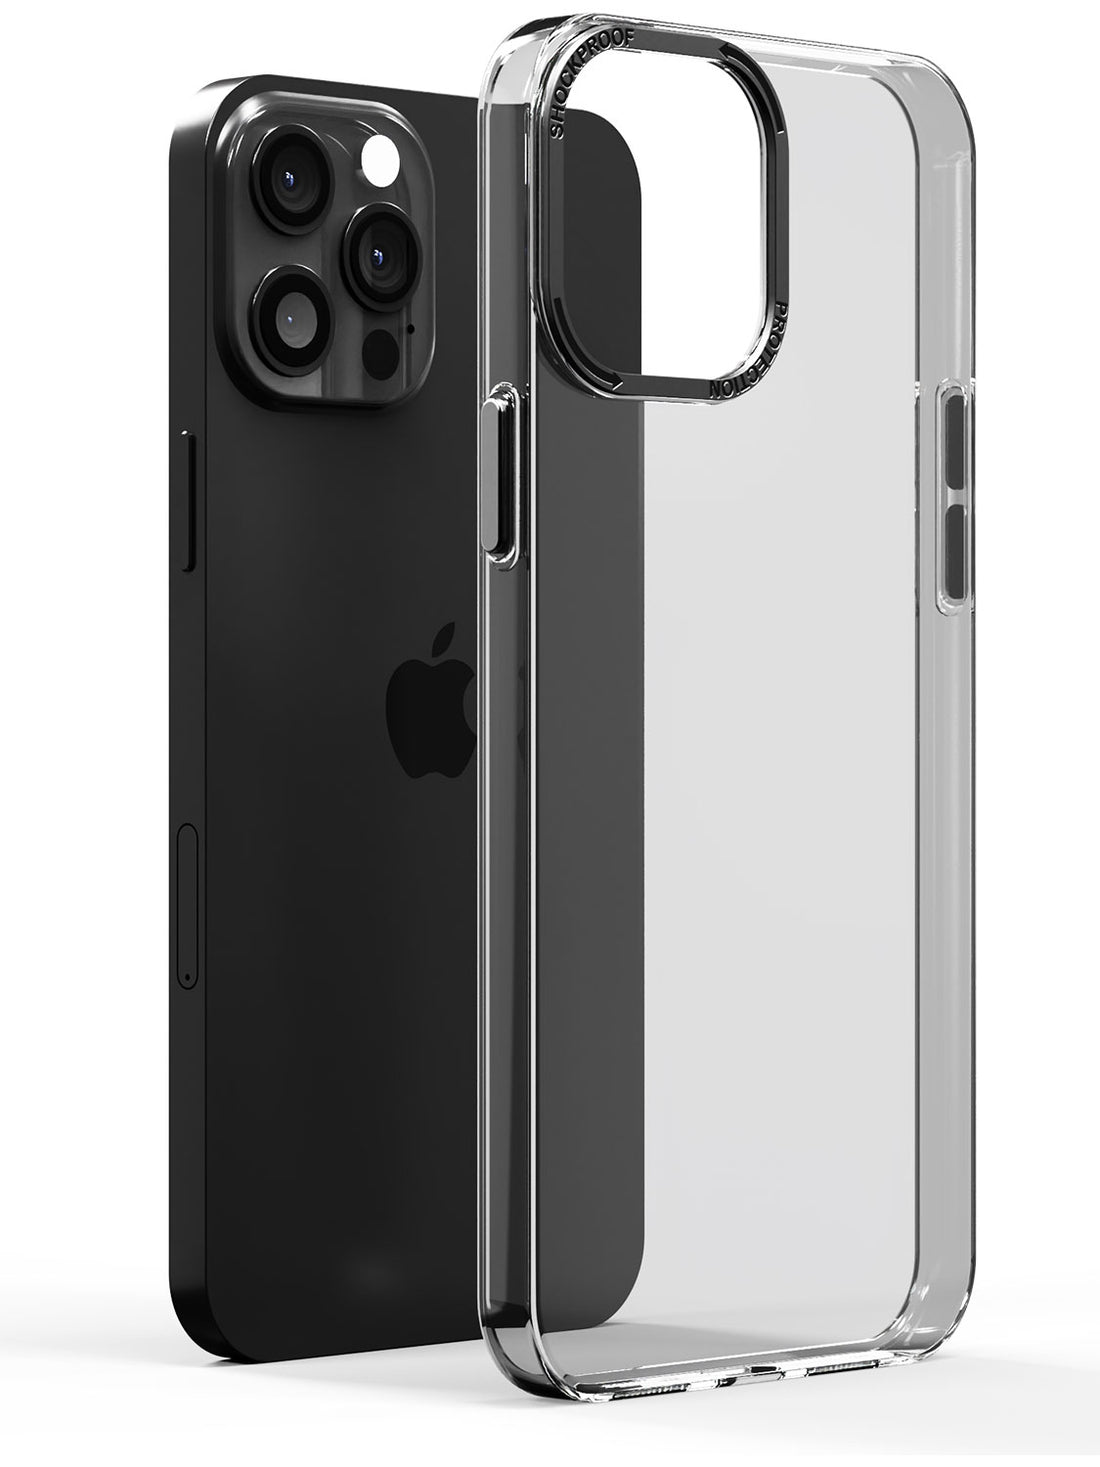 iphone 12 pro max case with camera protection , iphone 12 pro max cover with camera protection , iphone 12 pro max case cover with camera protection , iphone 12 pro max back cover with camera protection